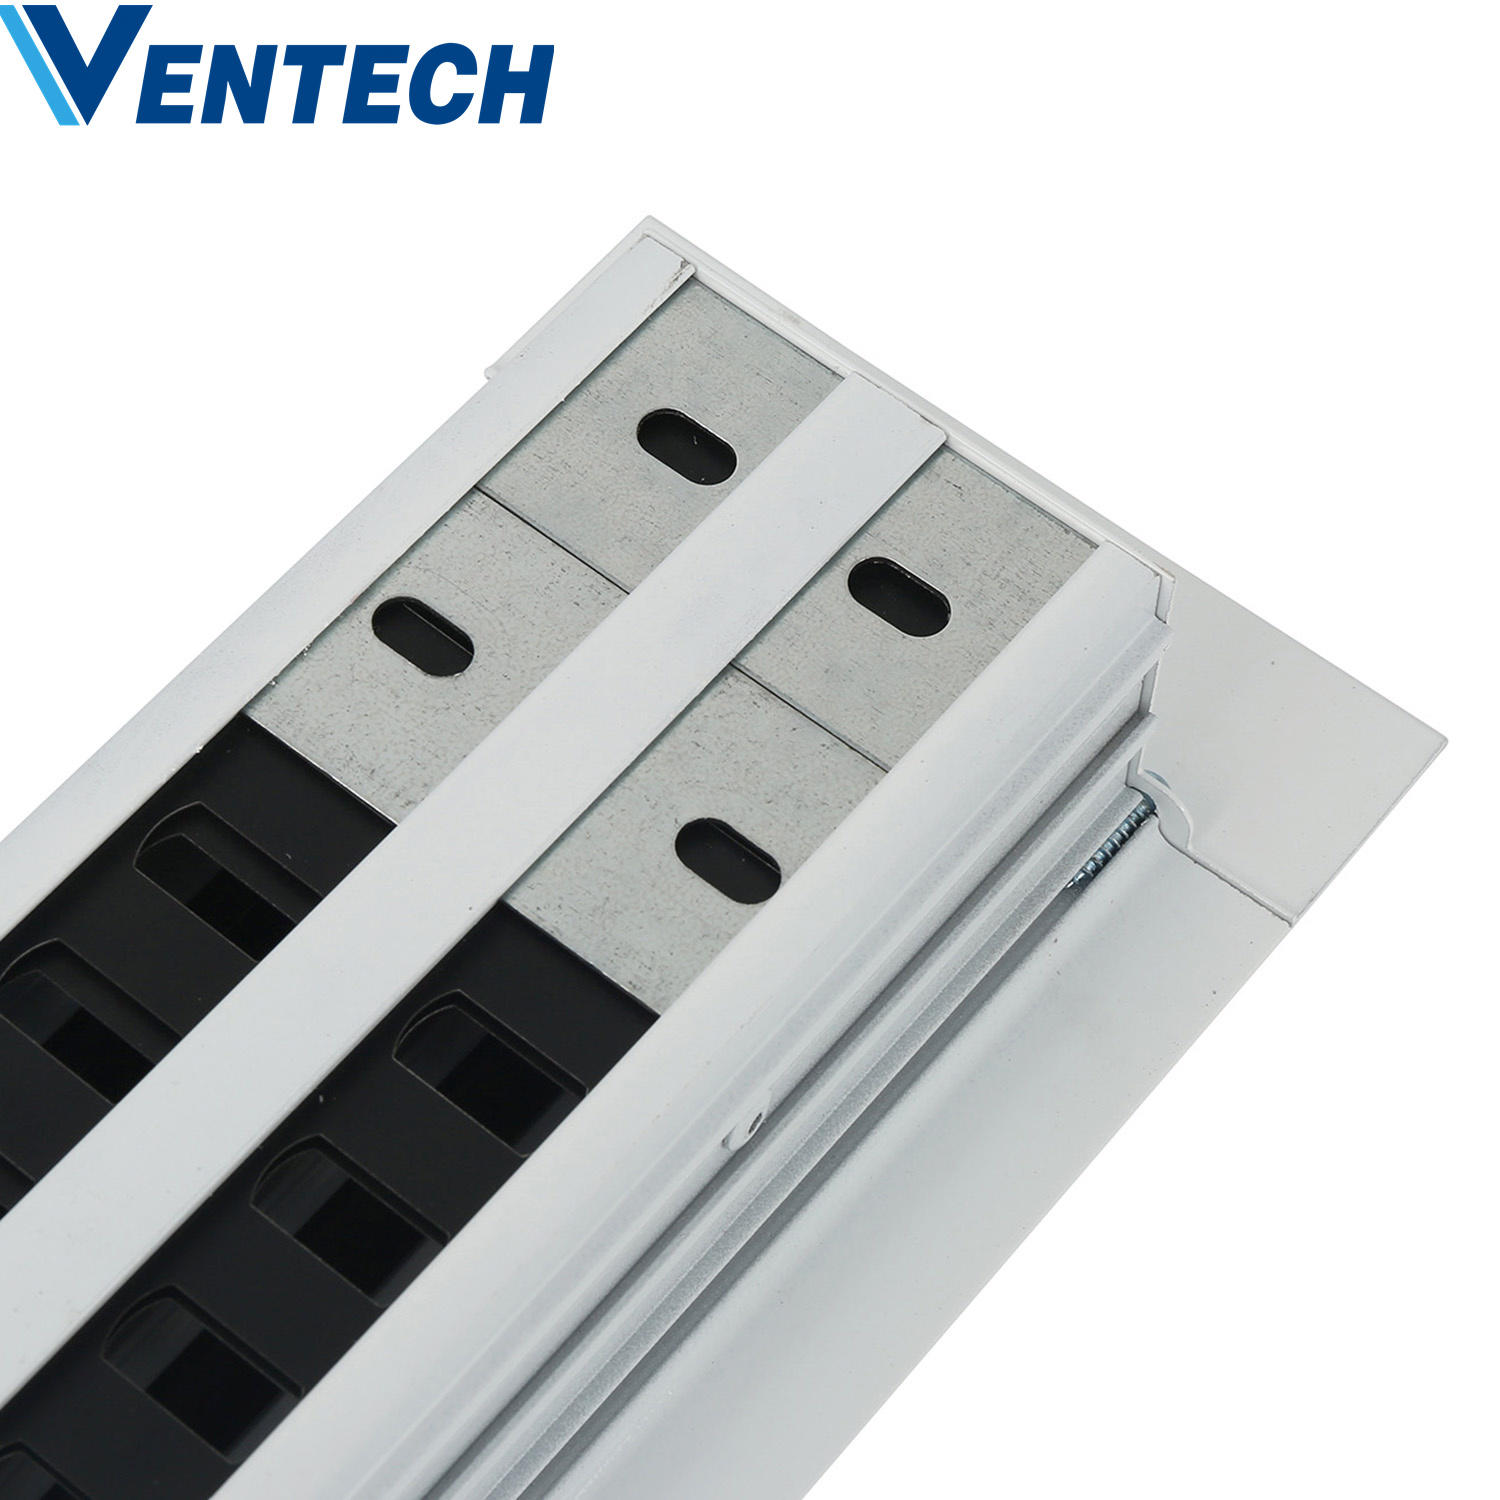 Hvac Aluminum Exhaust Supply Air Duct Linear Slot Price Ventilation Conditioning Ceiling Linear Slot Diffusers With Plenum Box